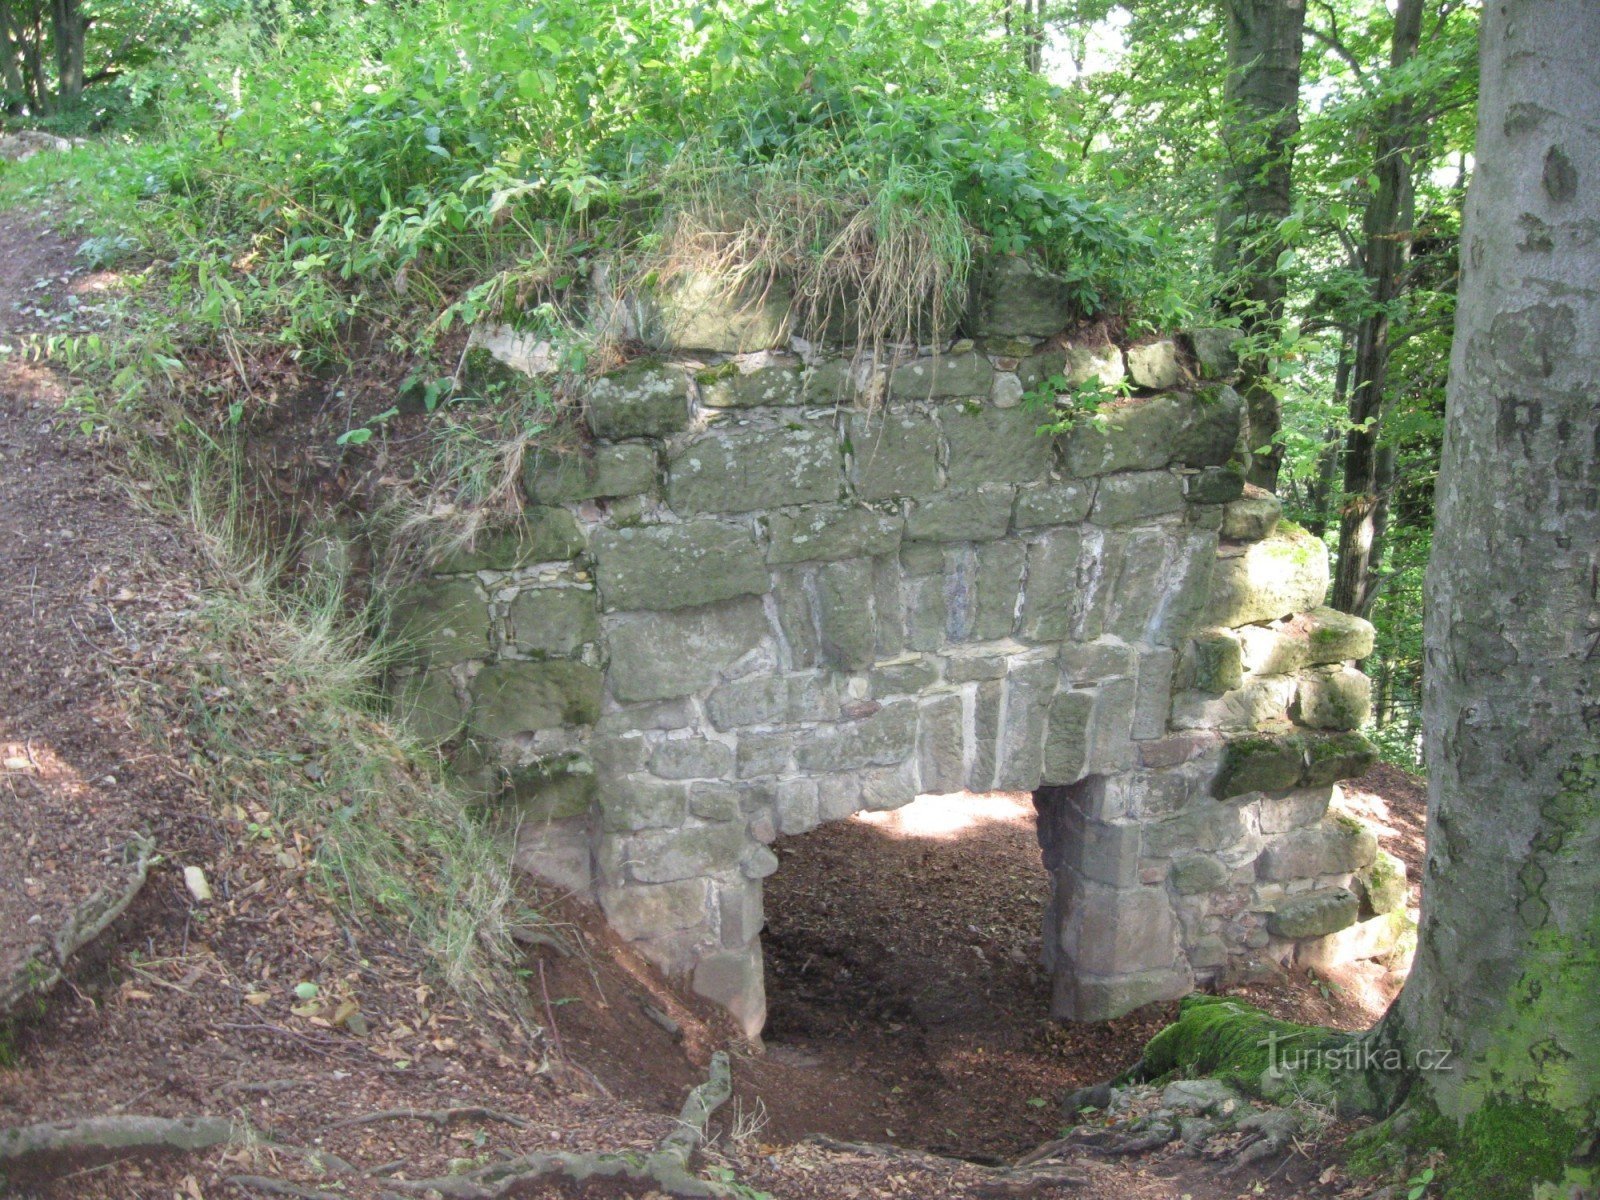 The remains of the walls